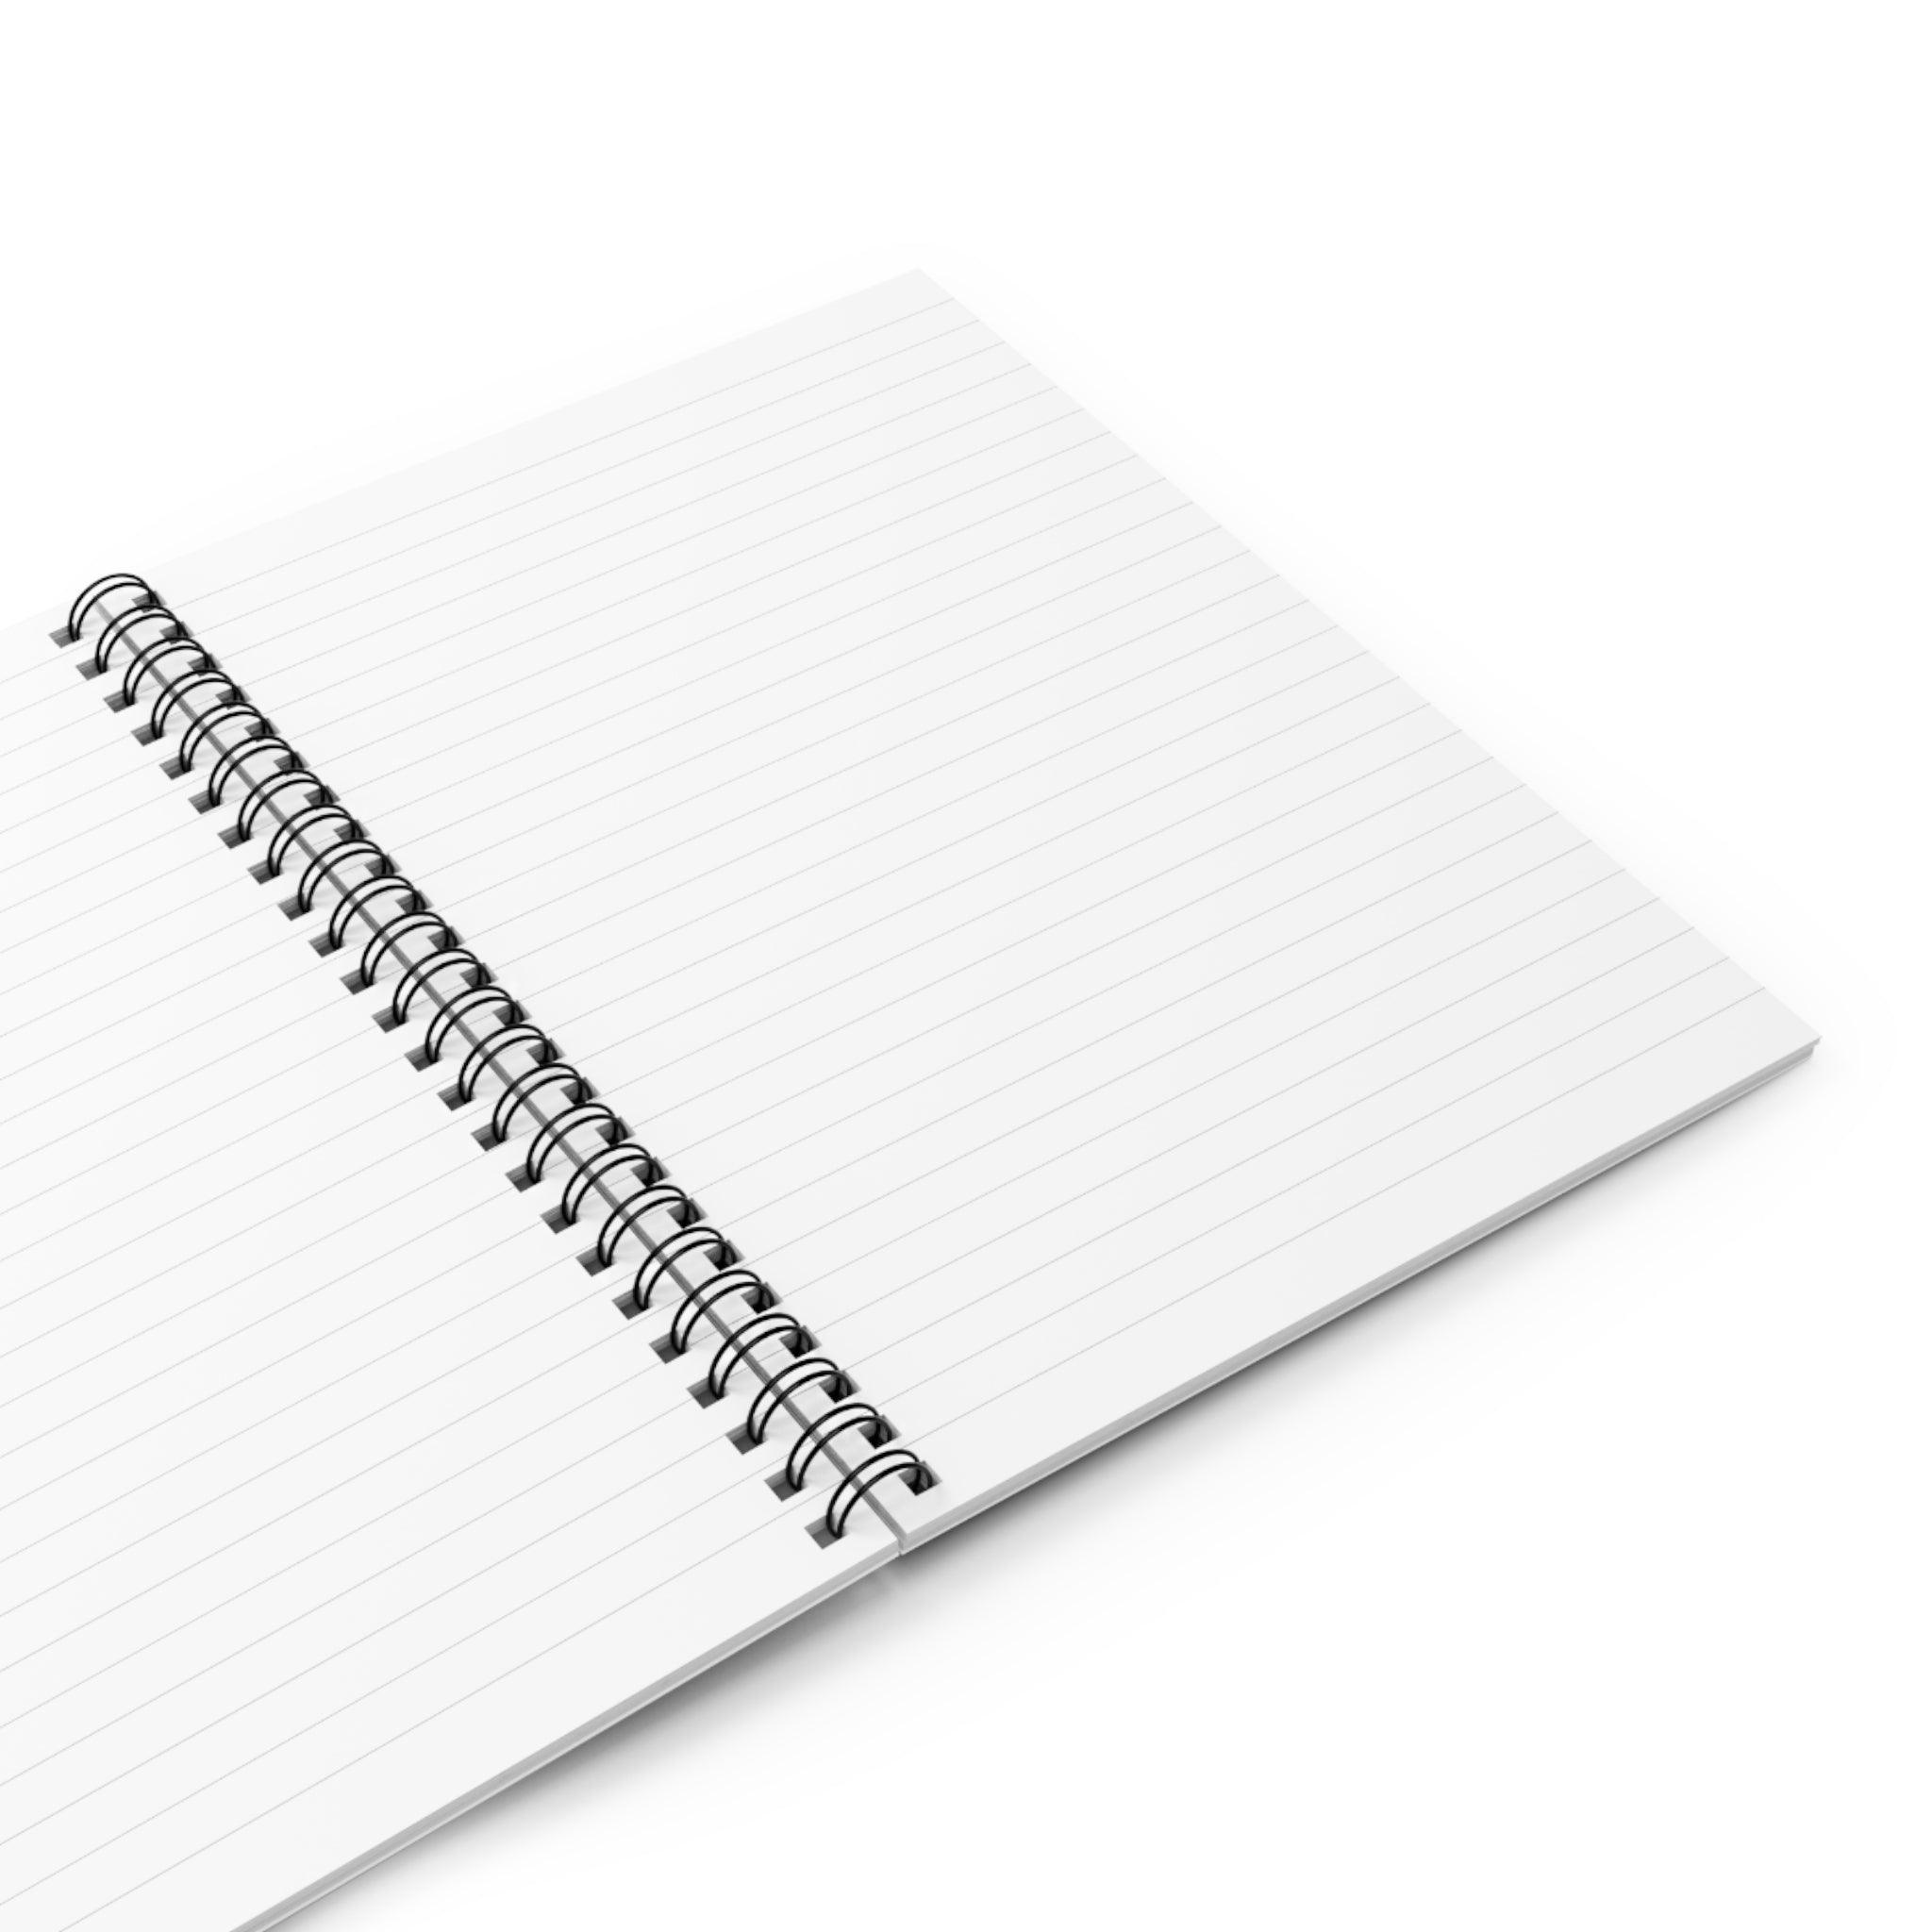 Pisces Spiral Notebook - Ruled Line - Classic Variable